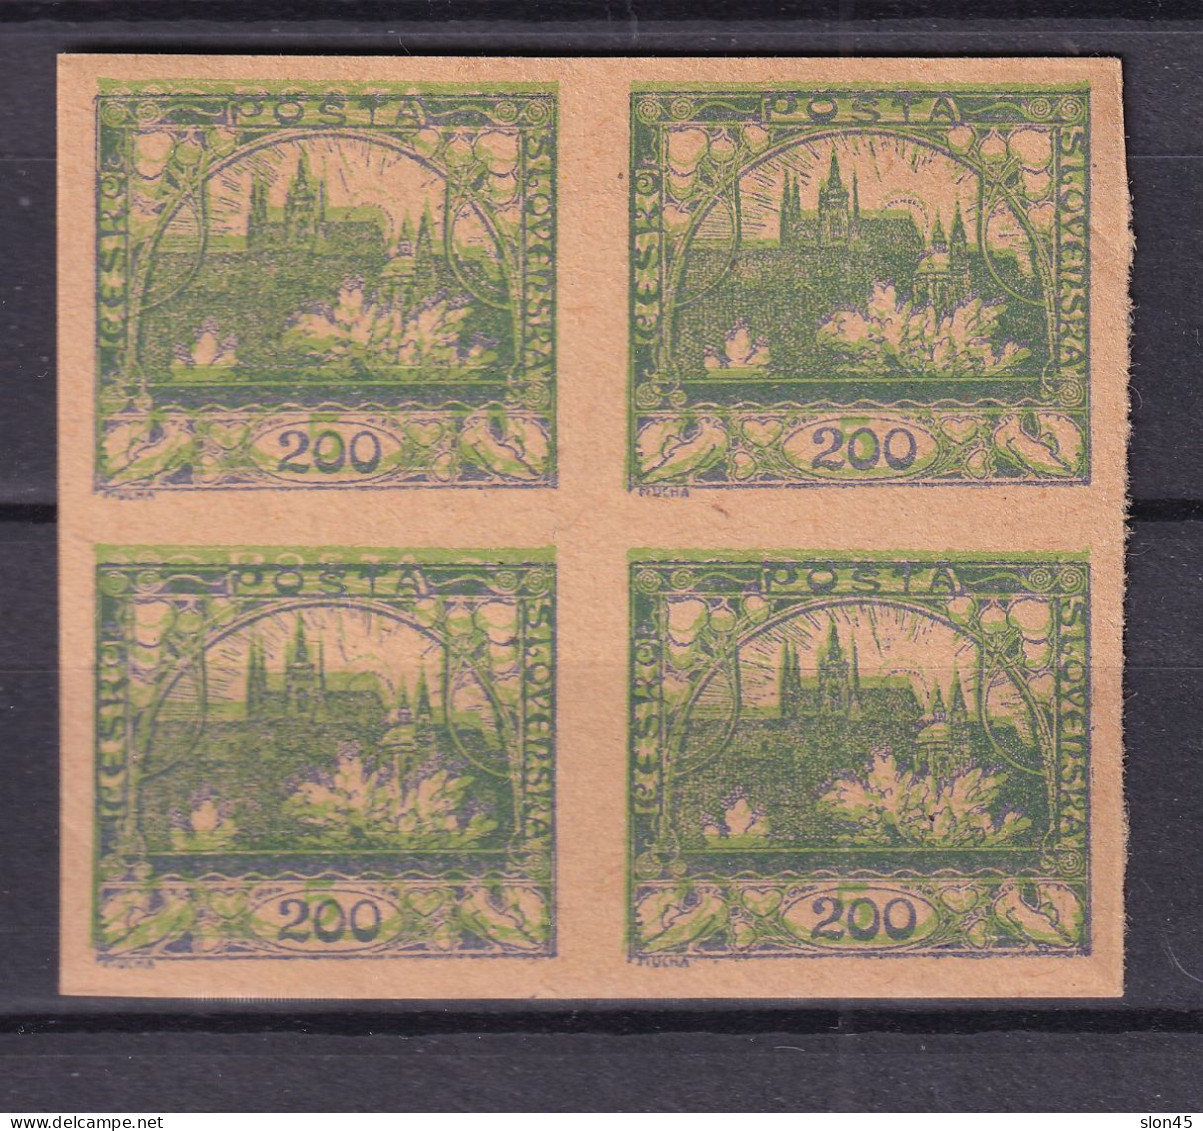 Czechoslovakia 1919 5h Green Imperf Double Print MNG Block Of 4 16080 - Oddities On Stamps